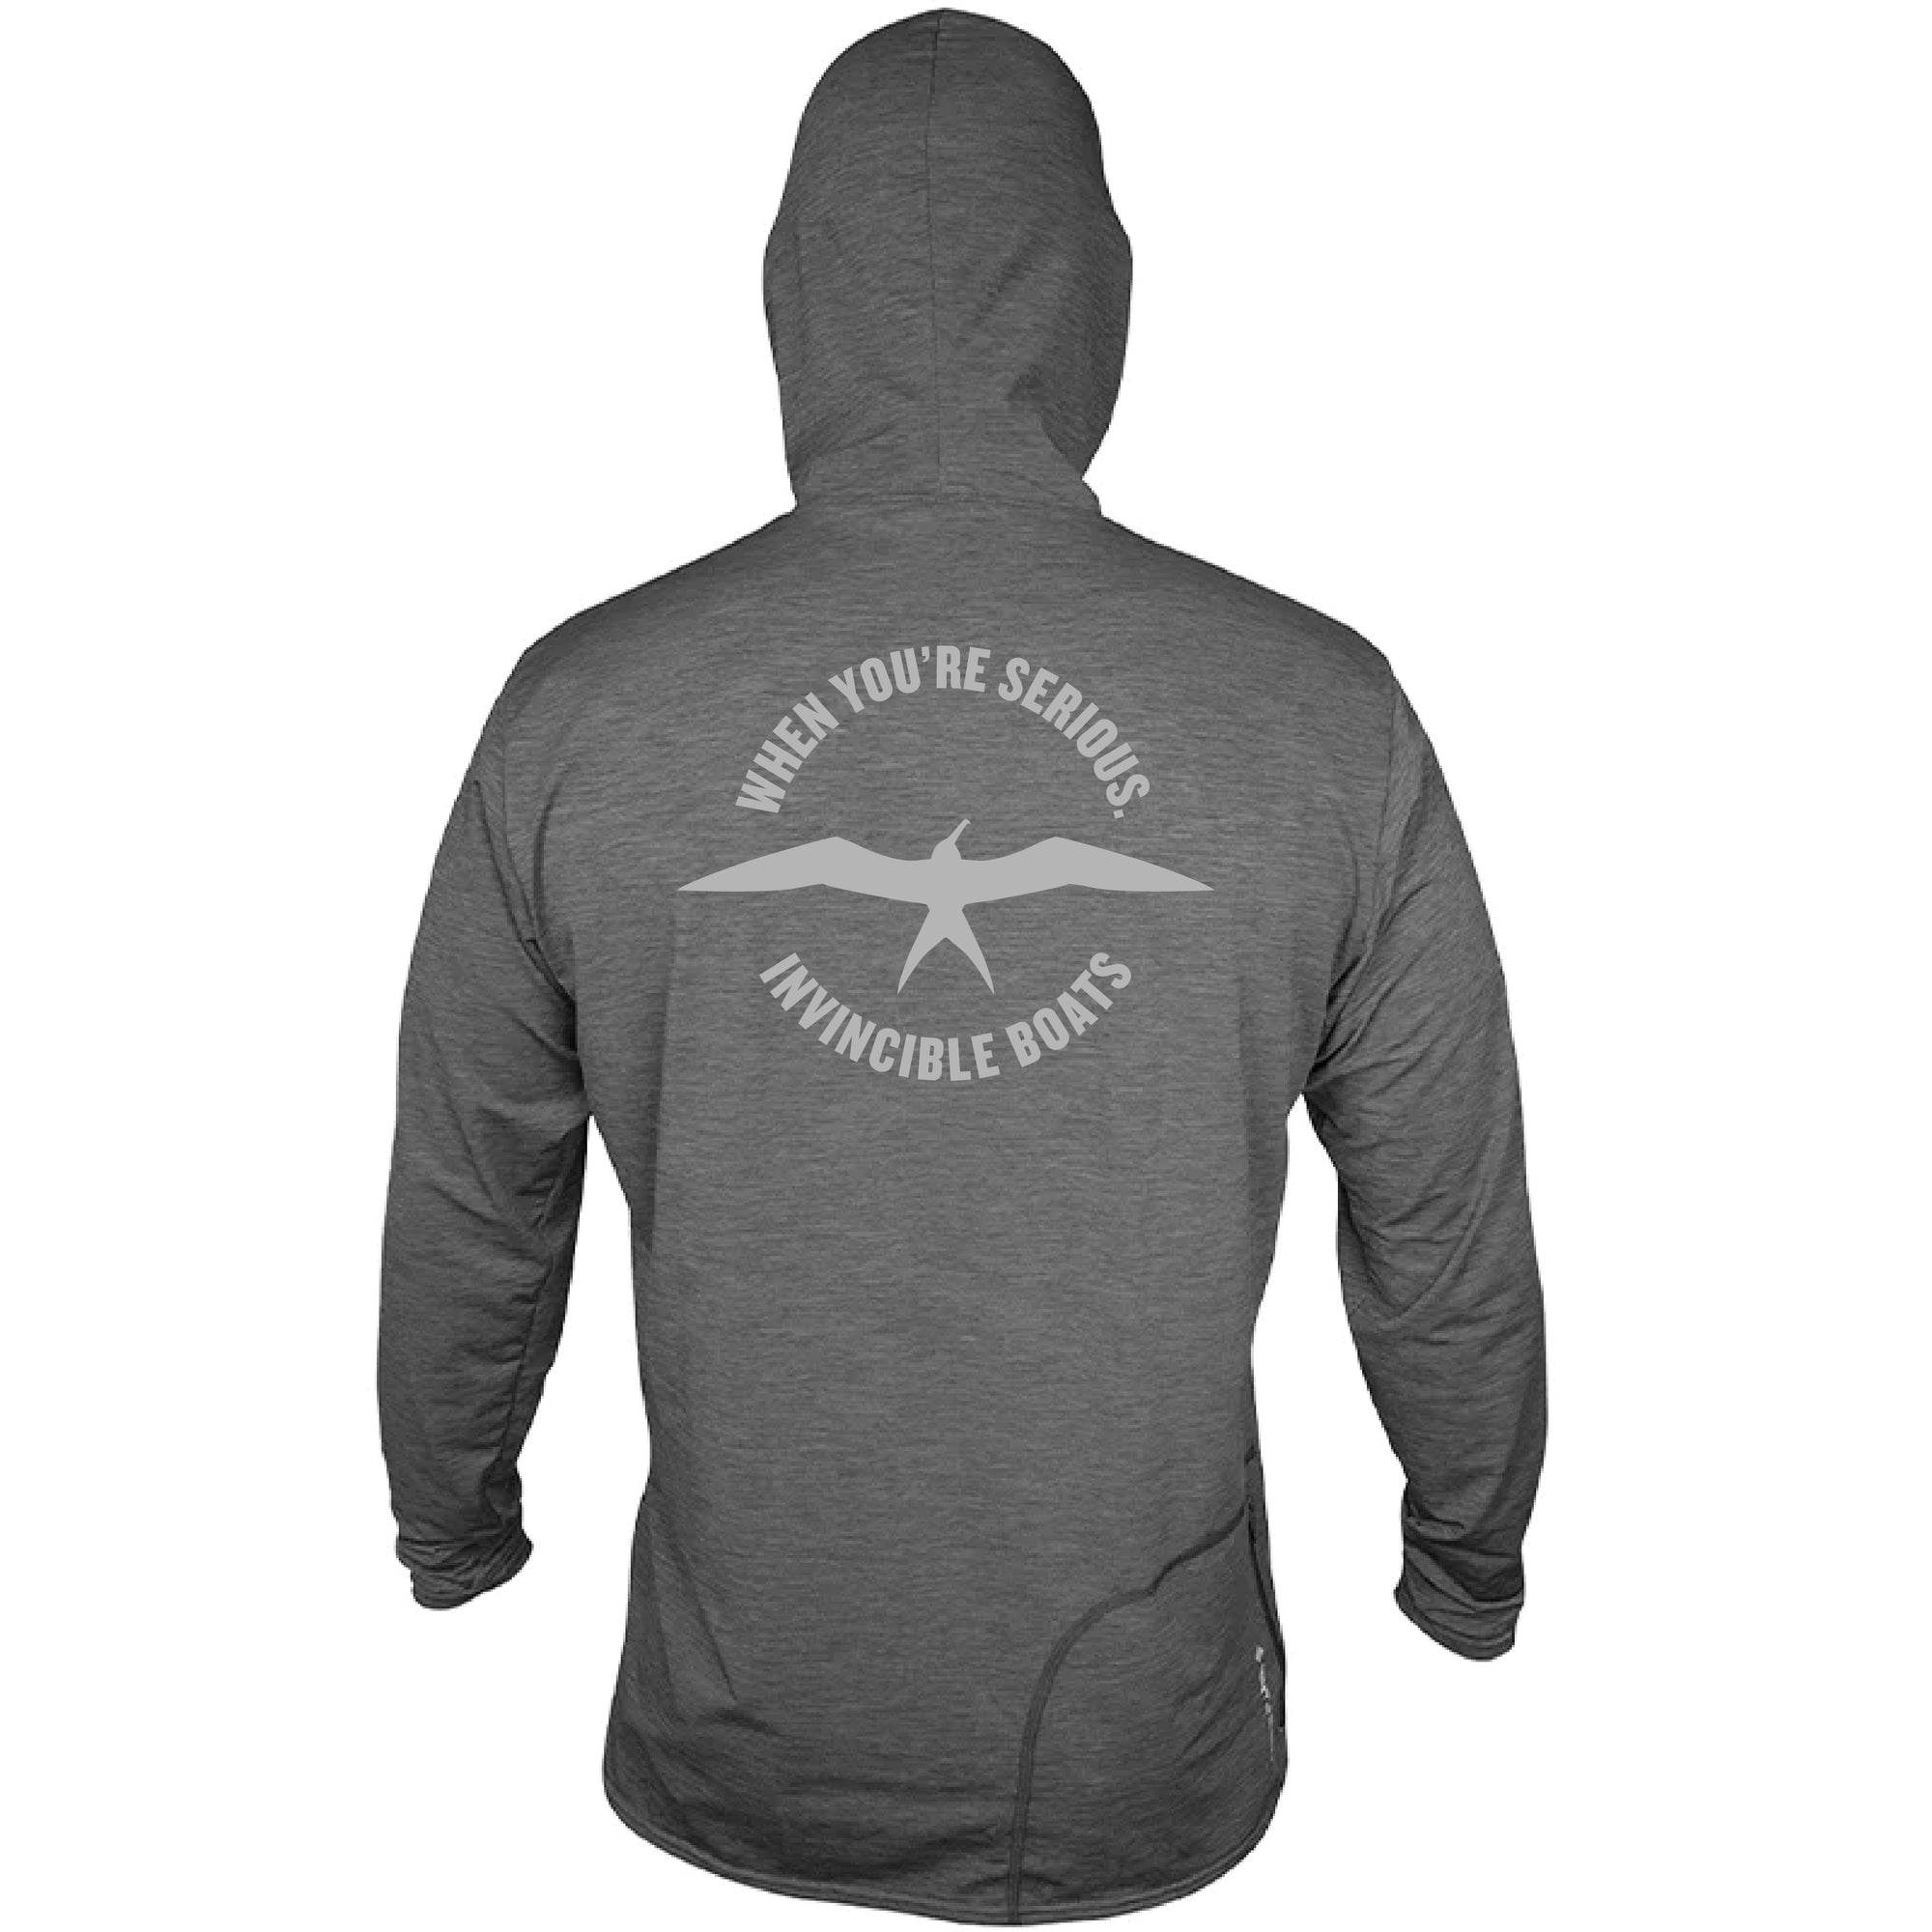 Invincible Anetik Low Pro Tech Hoody Charcoal Heathered